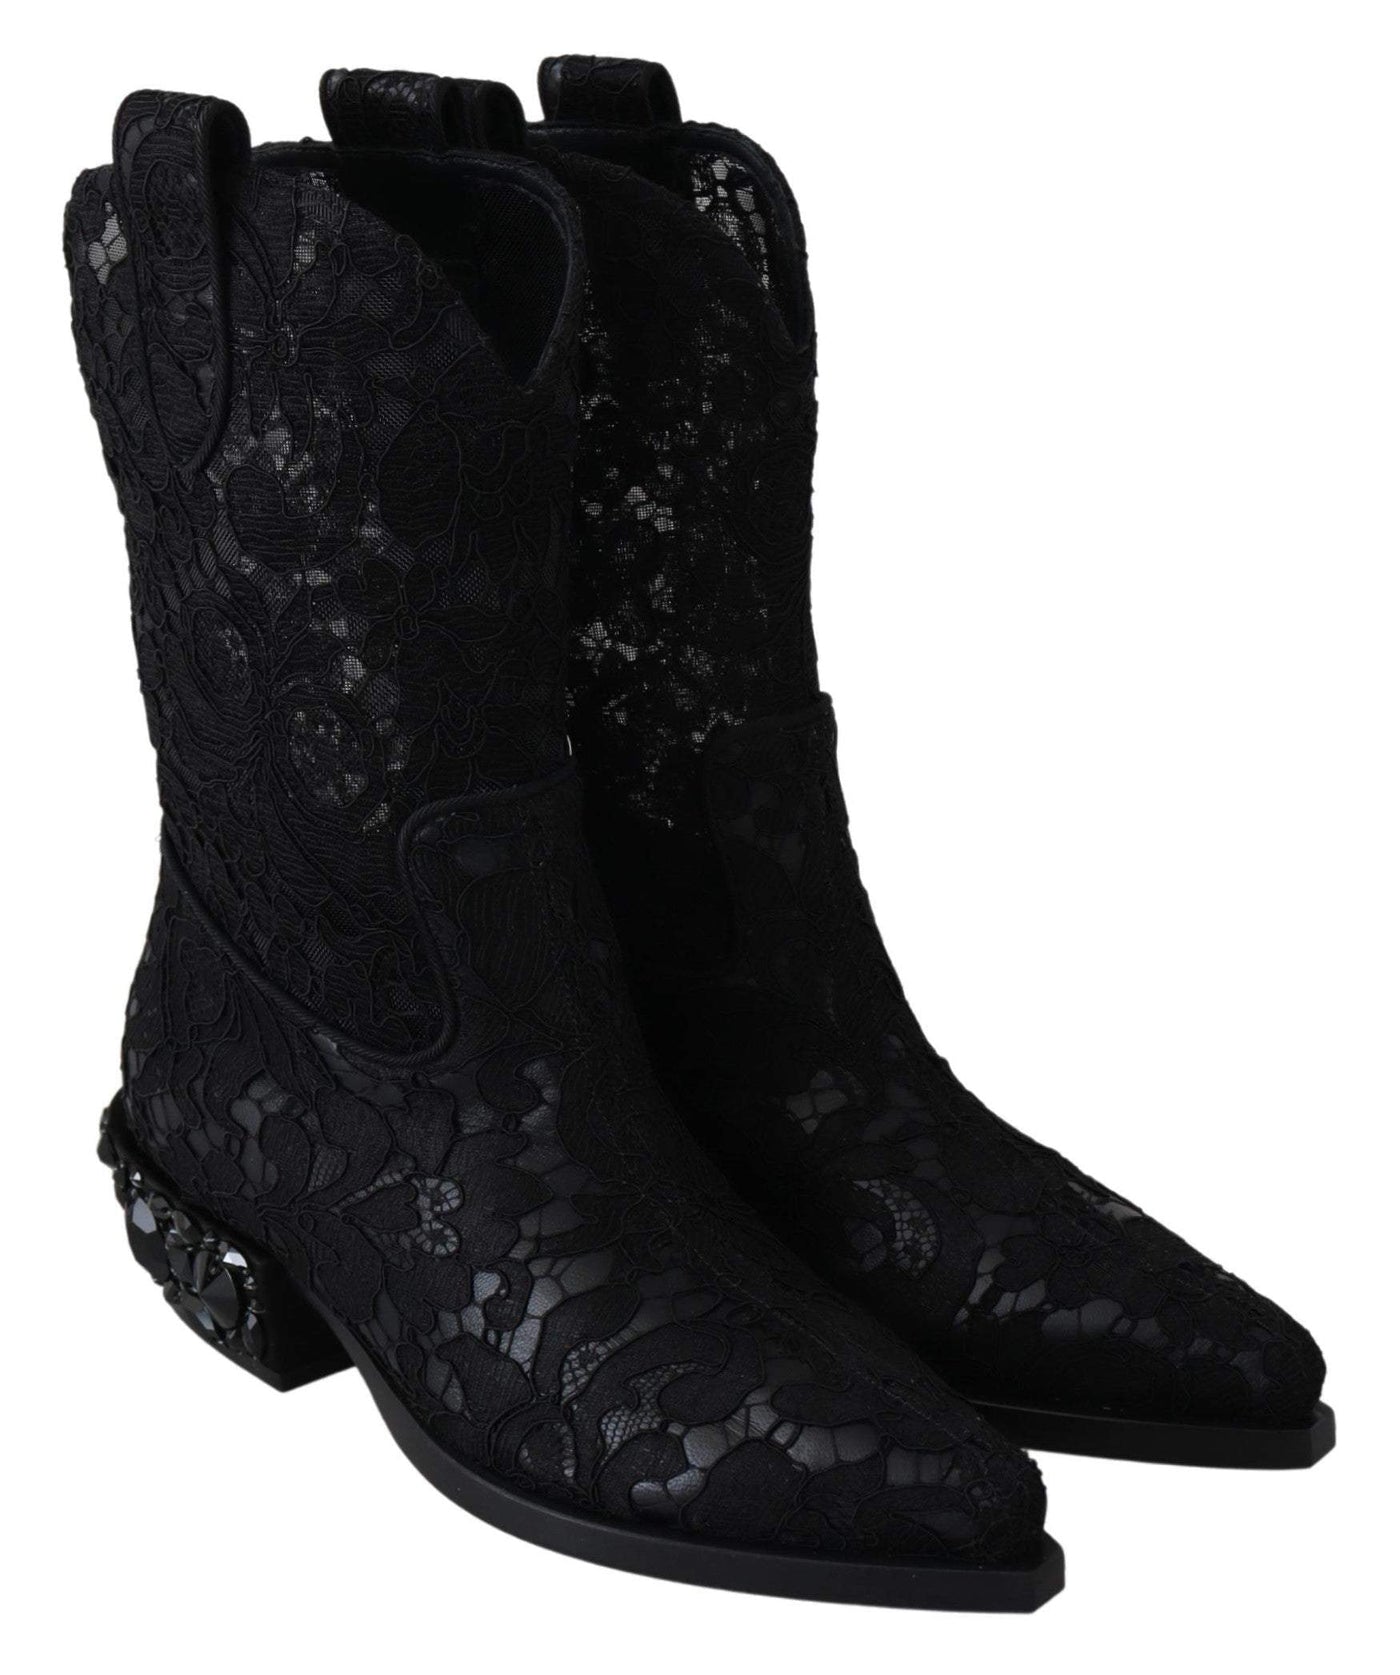 Dolce & Gabbana Black Lace Taormina Ankle Cowboy Crystal Shoes #women, Black, Boots - Women - Shoes, Dolce & Gabbana, EU35/US4.5, feed-agegroup-adult, feed-color-Black, feed-gender-female, Shoes - New Arrivals at SEYMAYKA